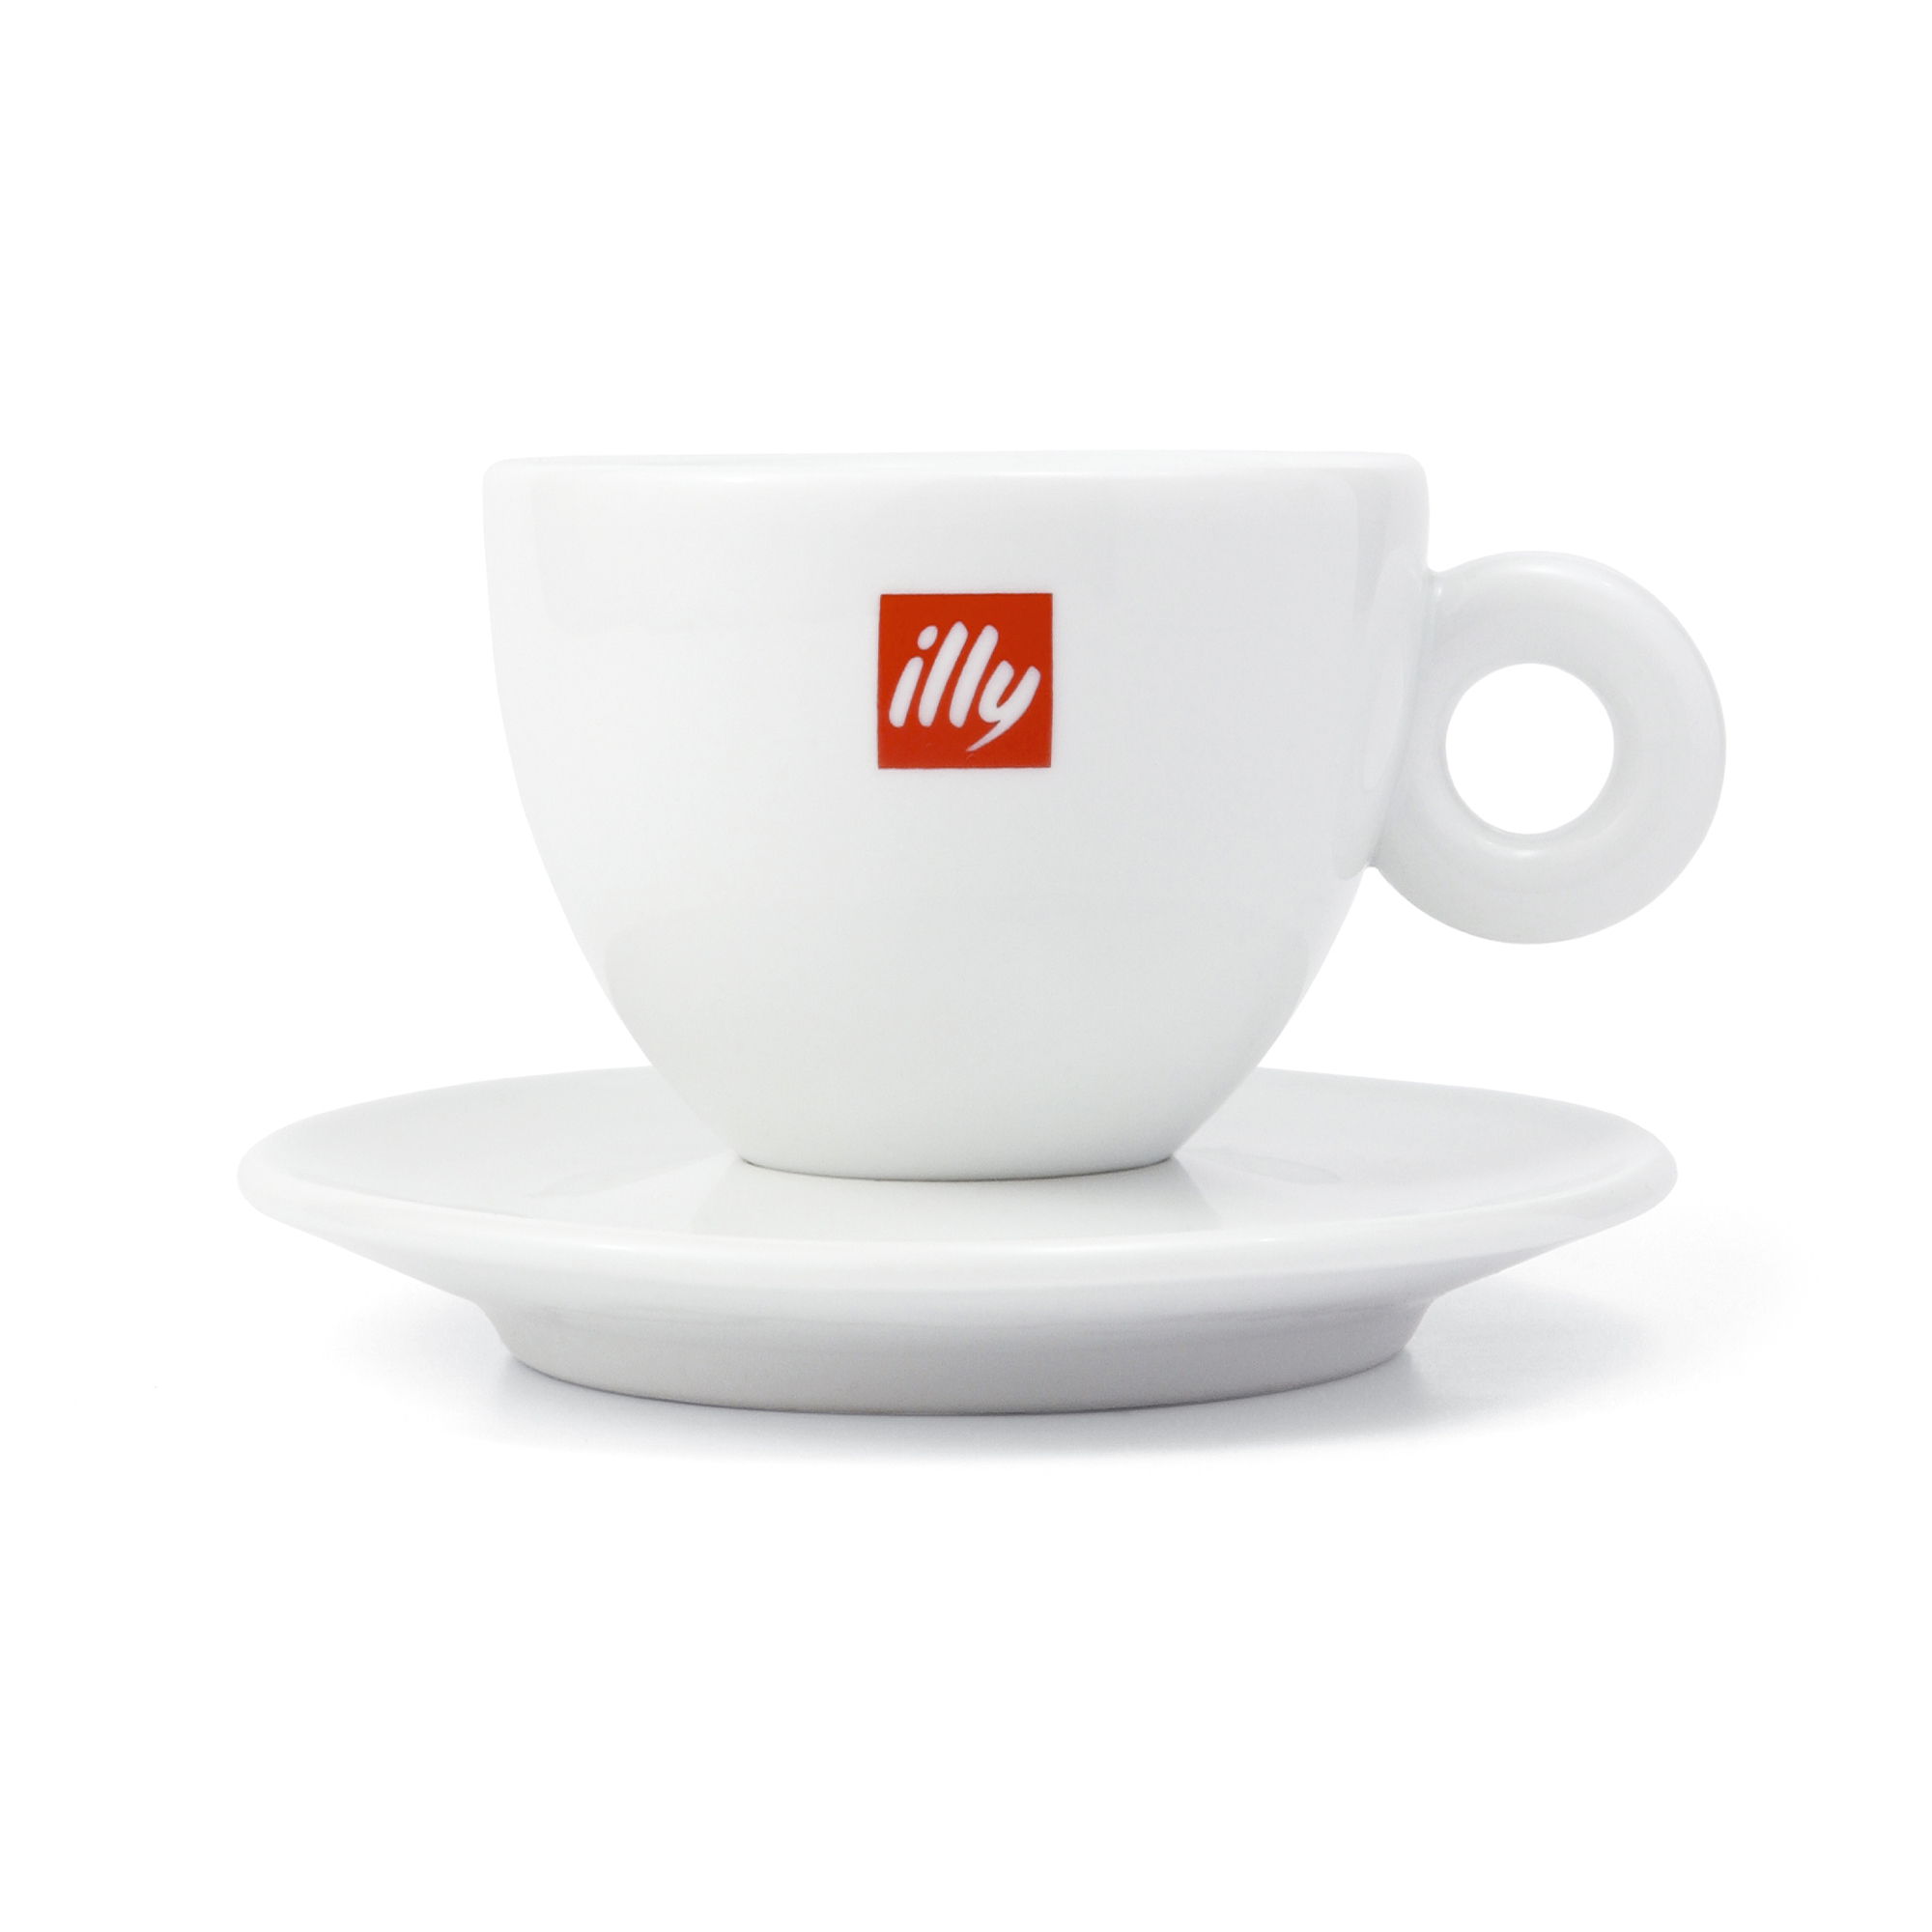 Set of 2 ILLY Coffee Cups & Saucers White Porcelain Espresso Italy Logo 